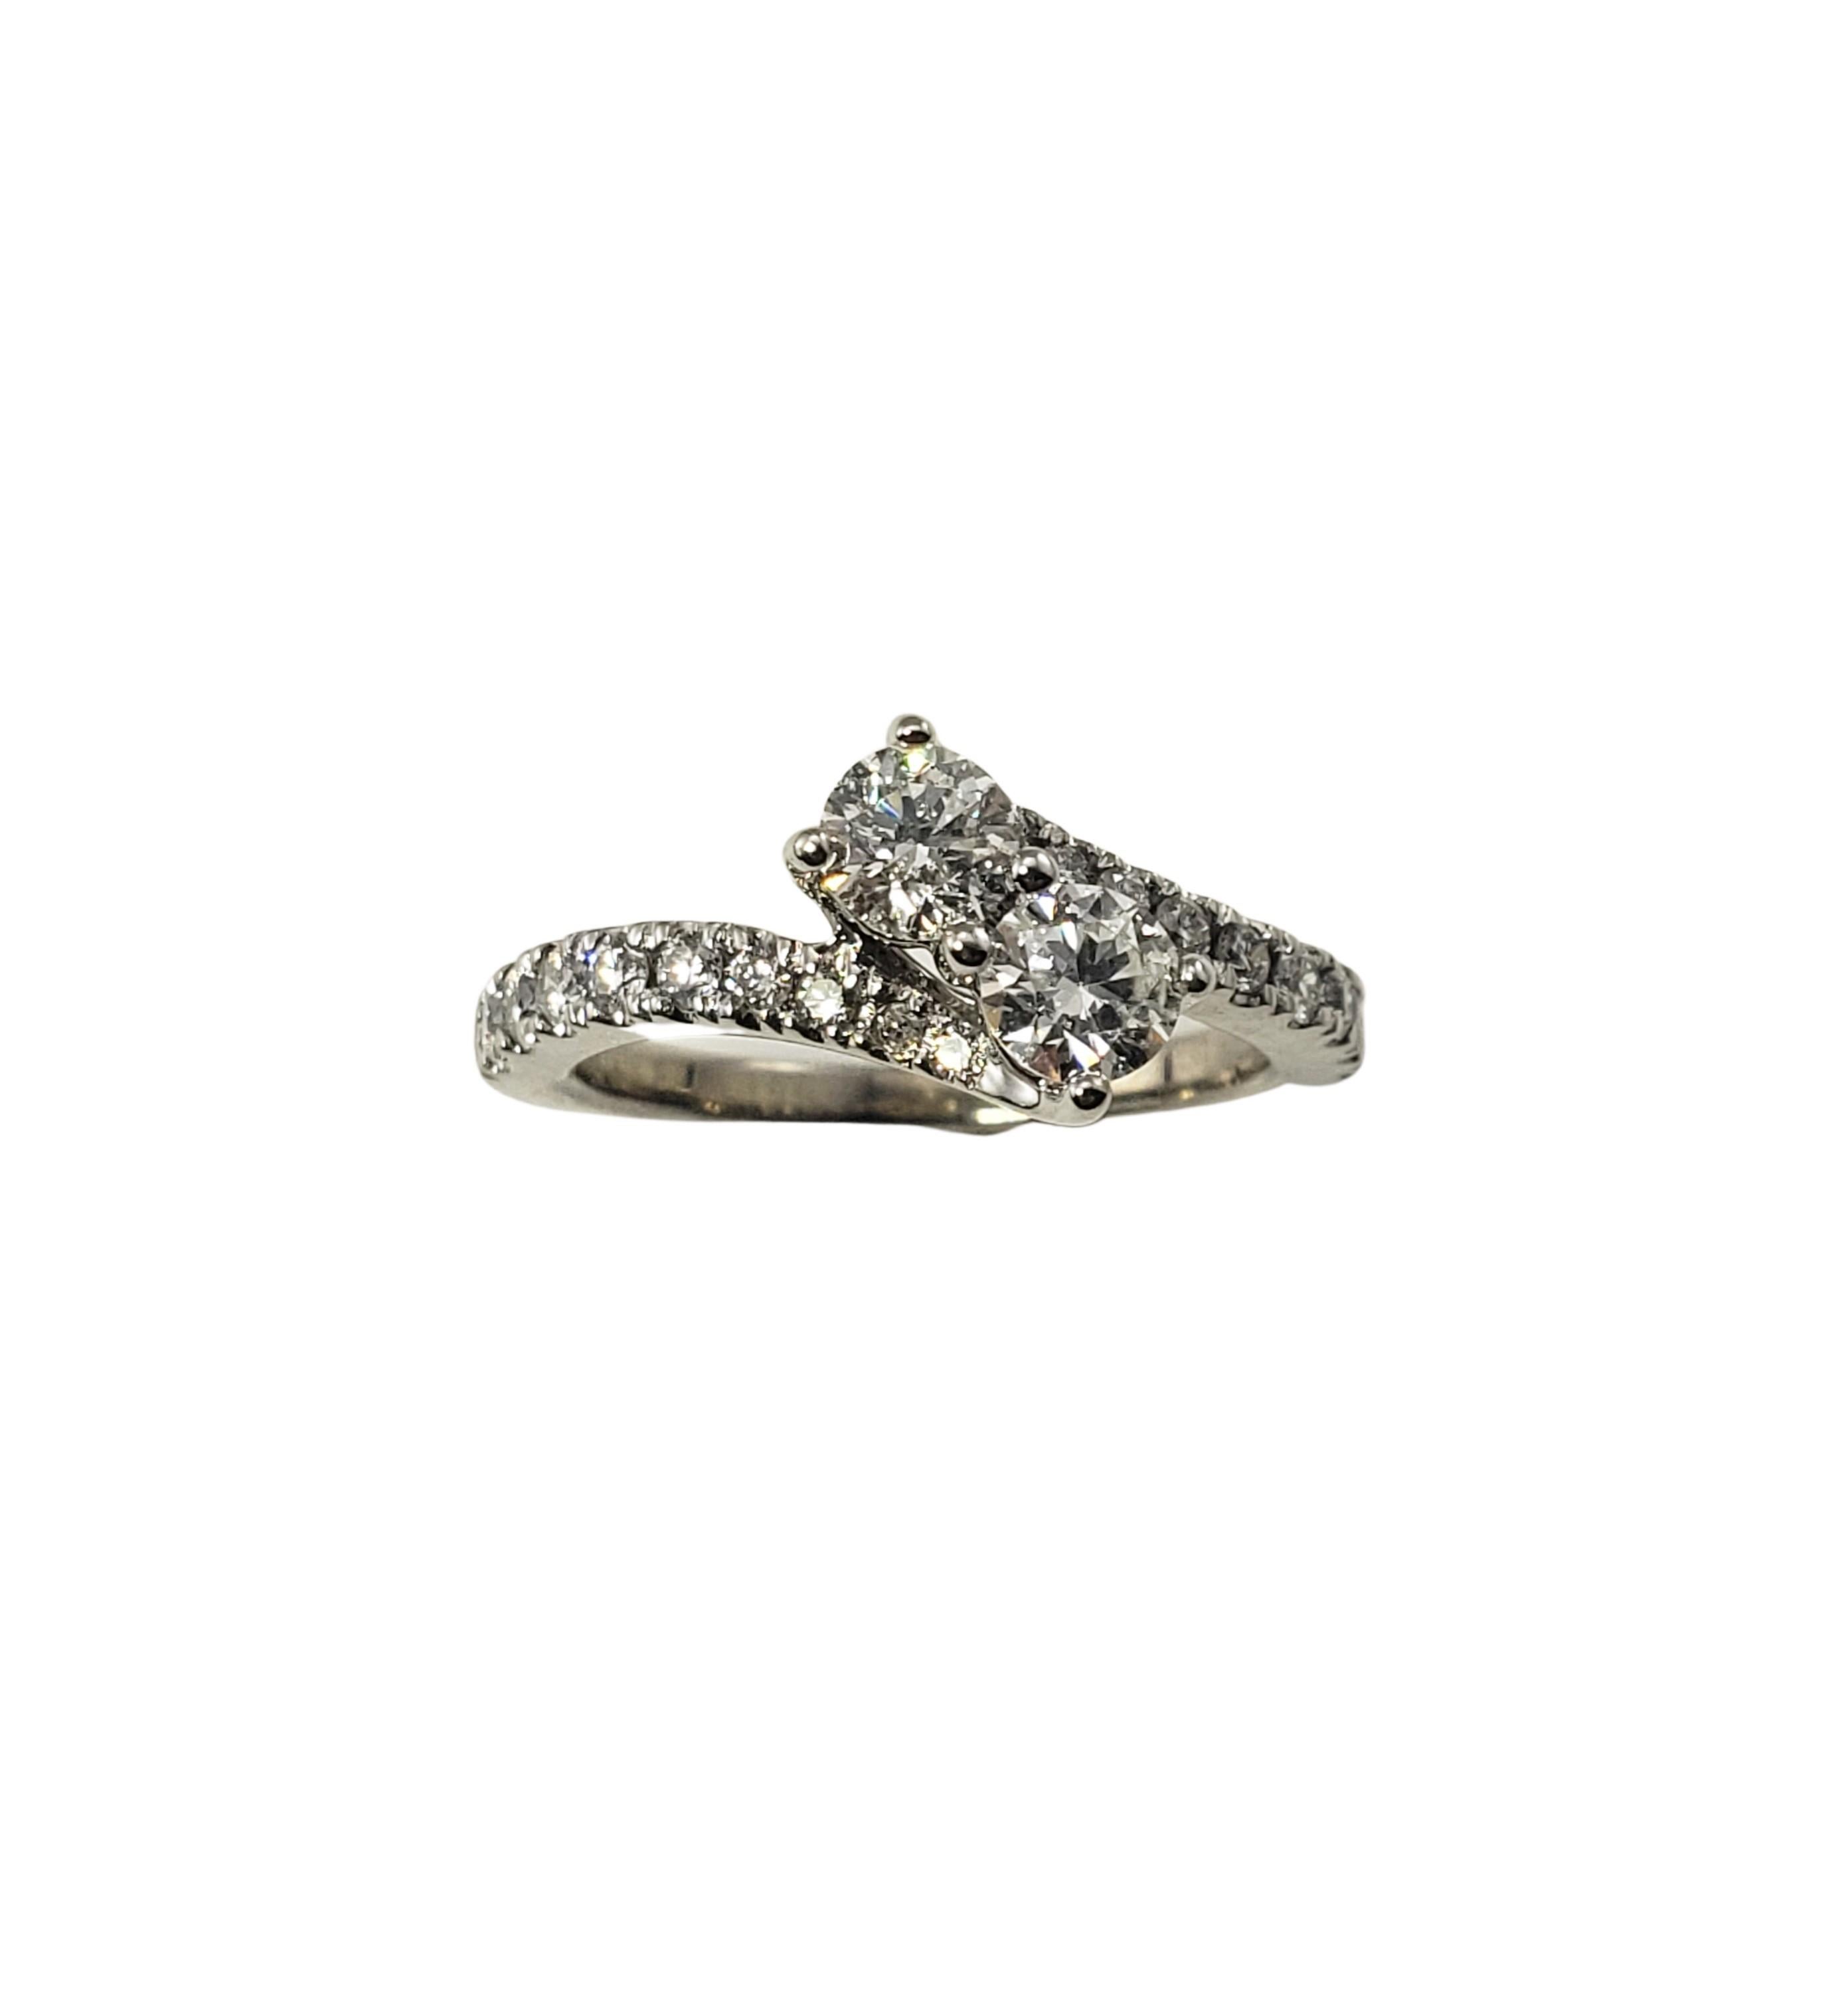 14 Karat White Gold and Diamond Ring Size 6.25-

This sparkling 14K white gold ring features two round brilliant cut diamonds in its center (total weight: .60 ct.) and 18 round brilliant cut diamonds on its band (total weight: .30 ct.).